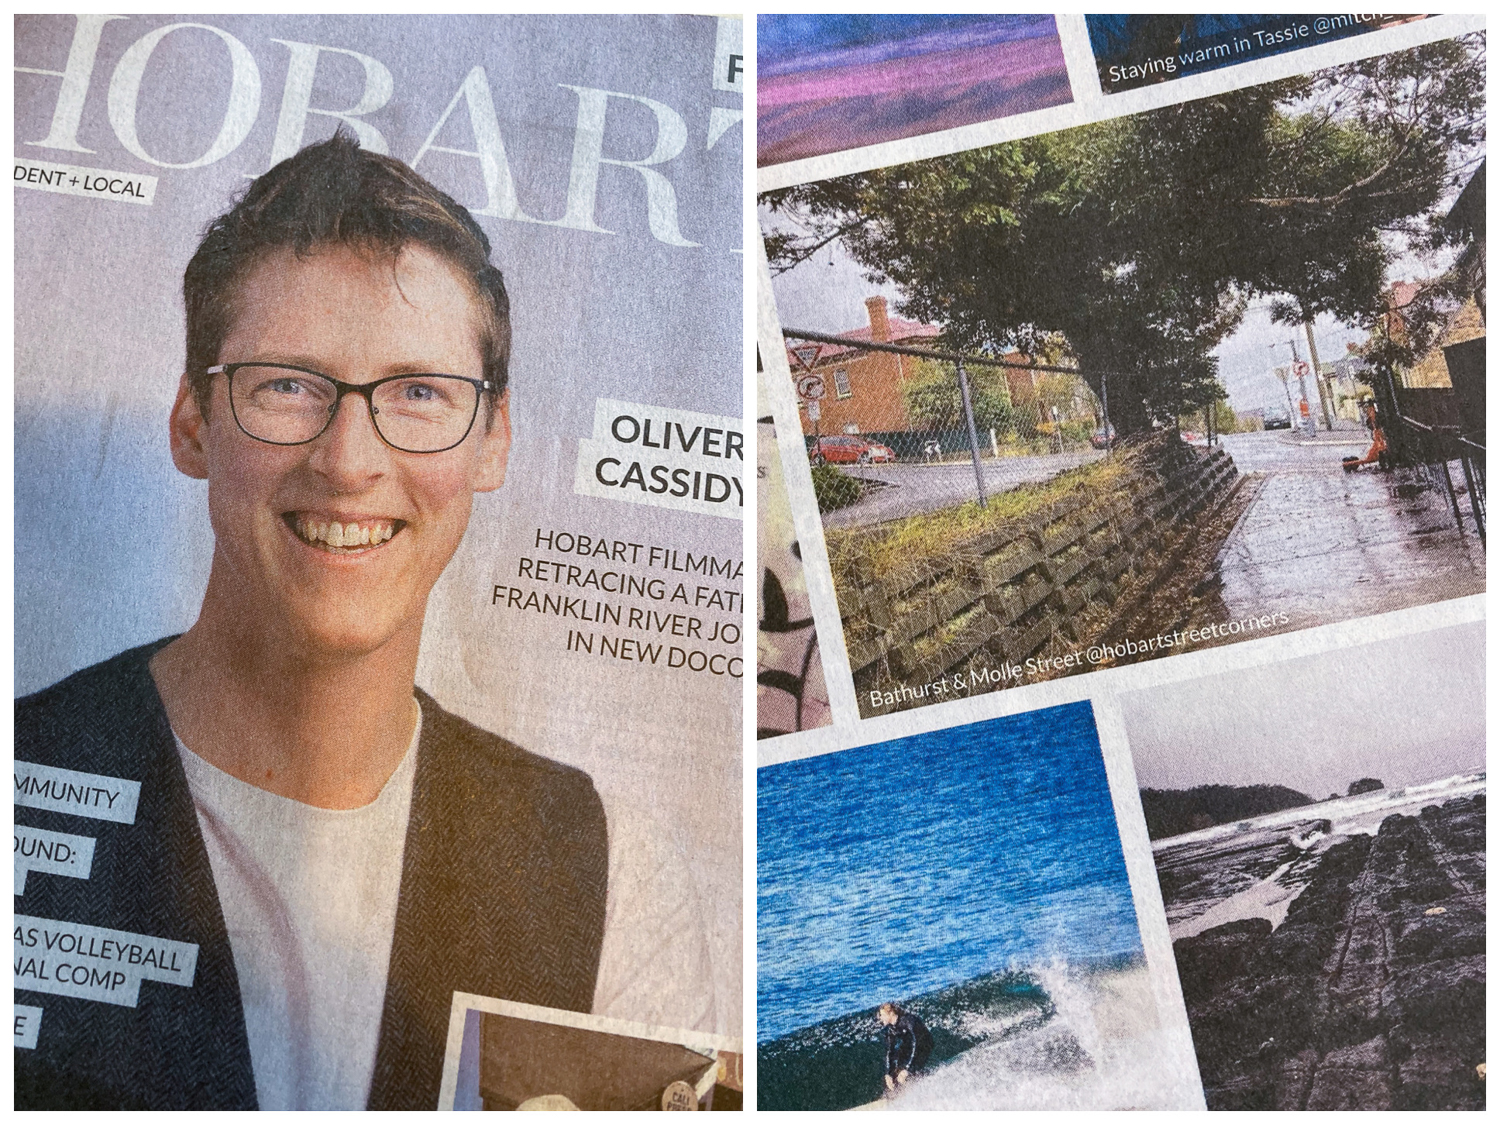 On the left, the cover of The Hobart Magazine featuring a man wearing glasses; on the right a collage of images including a street corner with a scooter on the footpath